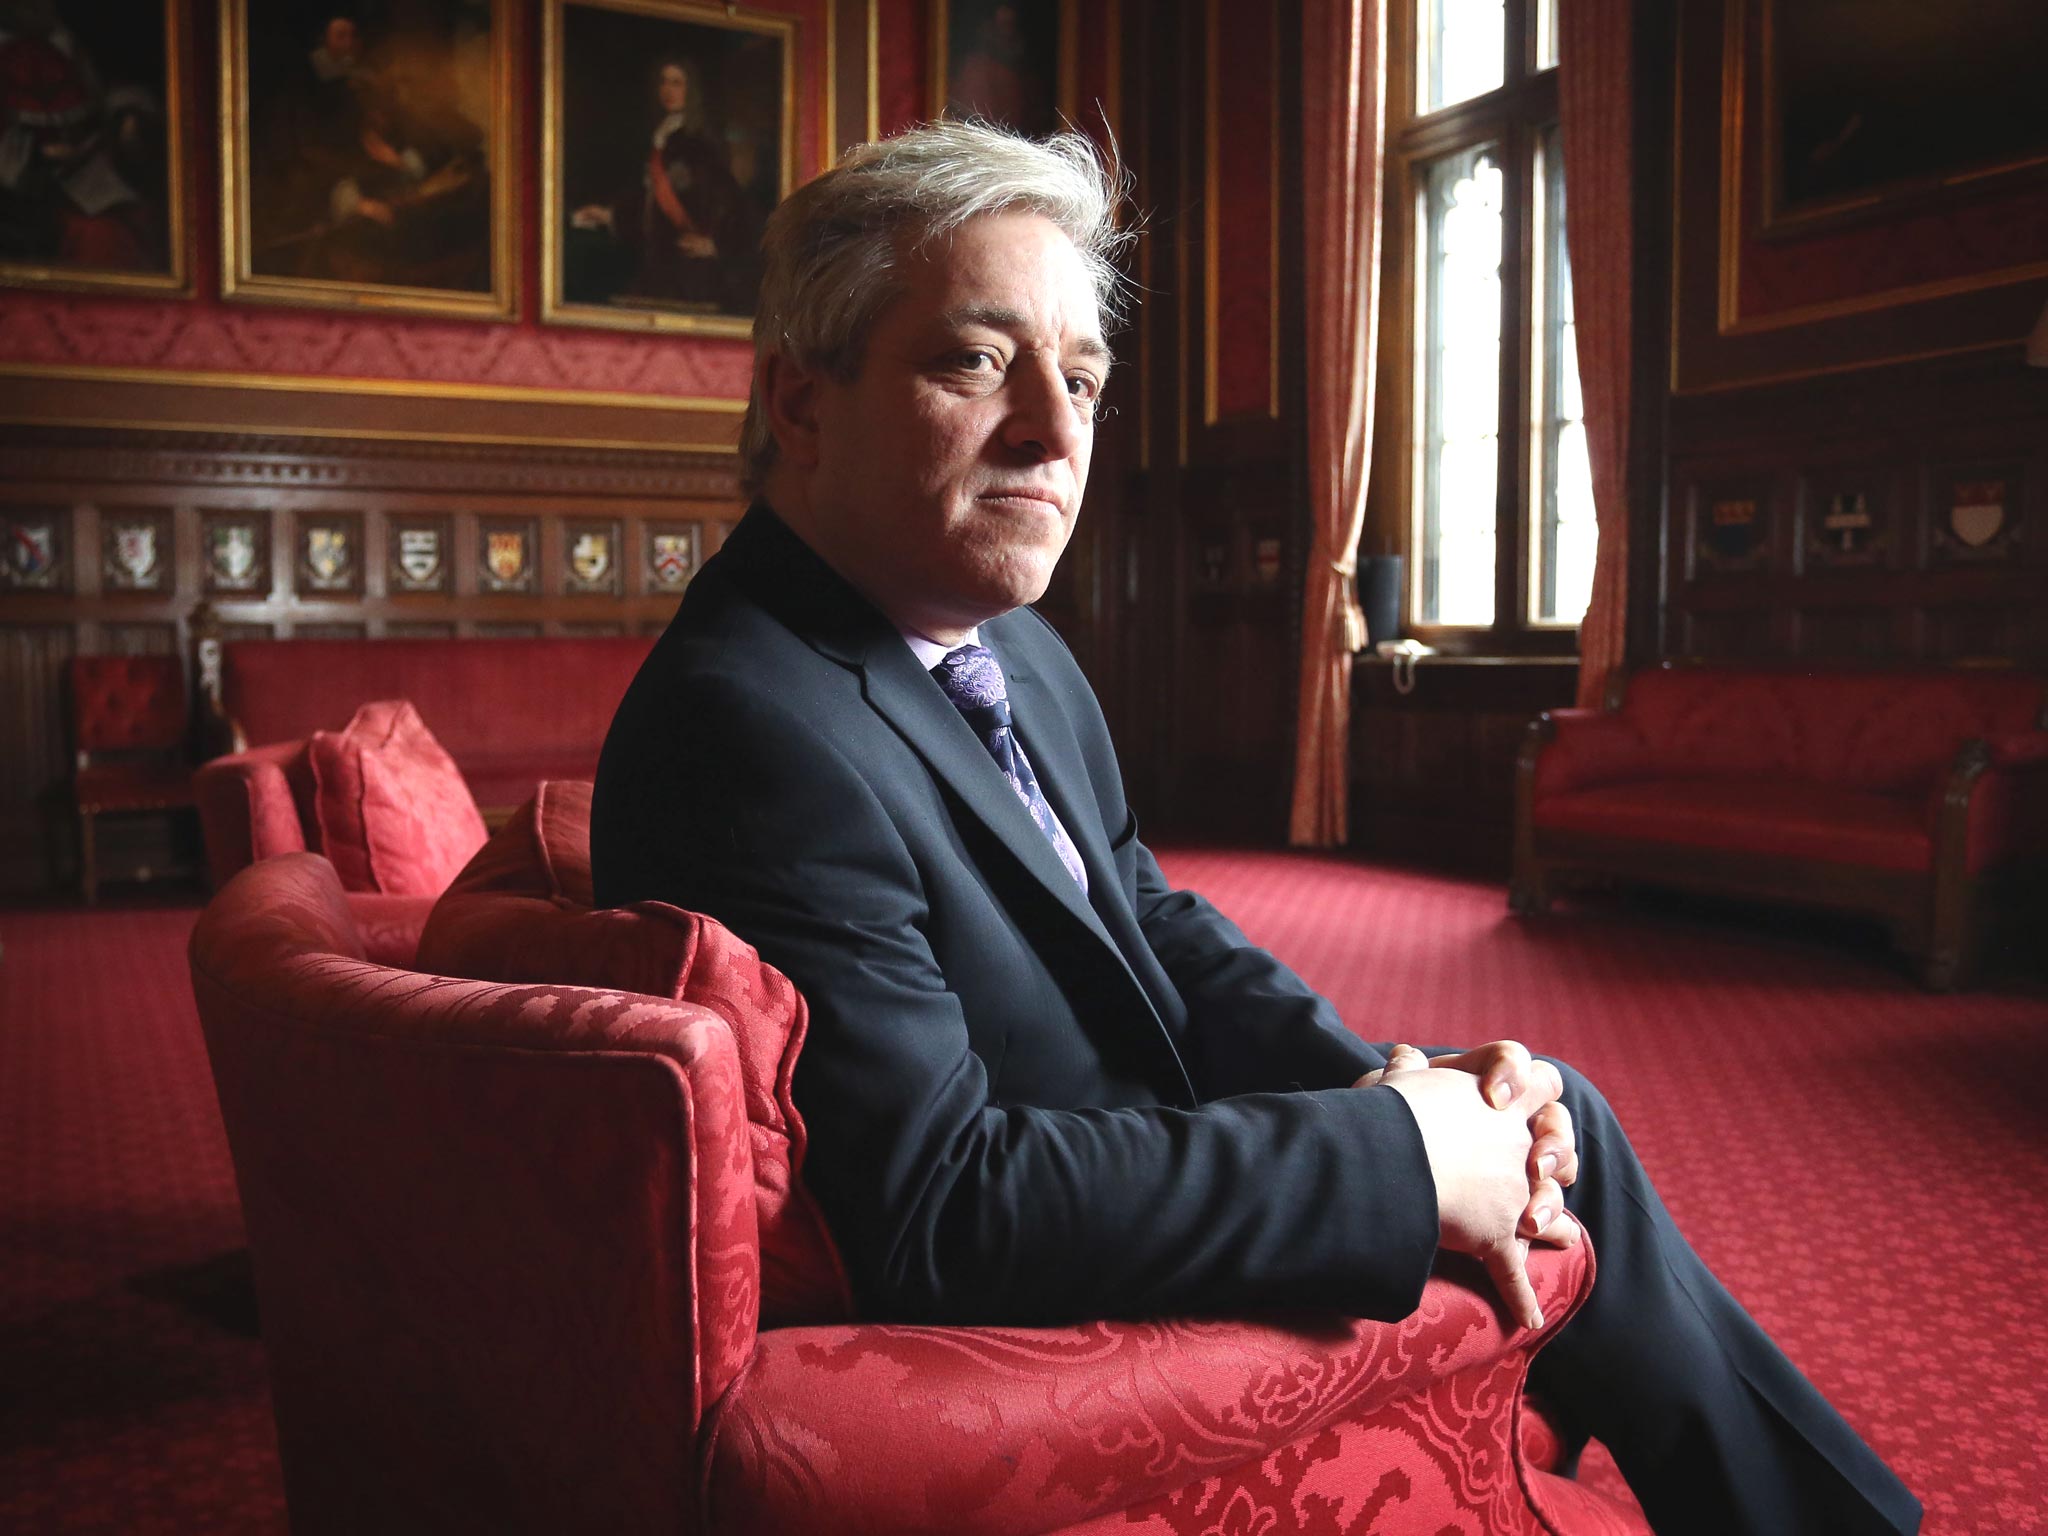 Commons Speaker John Bercow: 'I have in the past suggested a lot of members of the public would expect members of Parliament to do a full-time job'